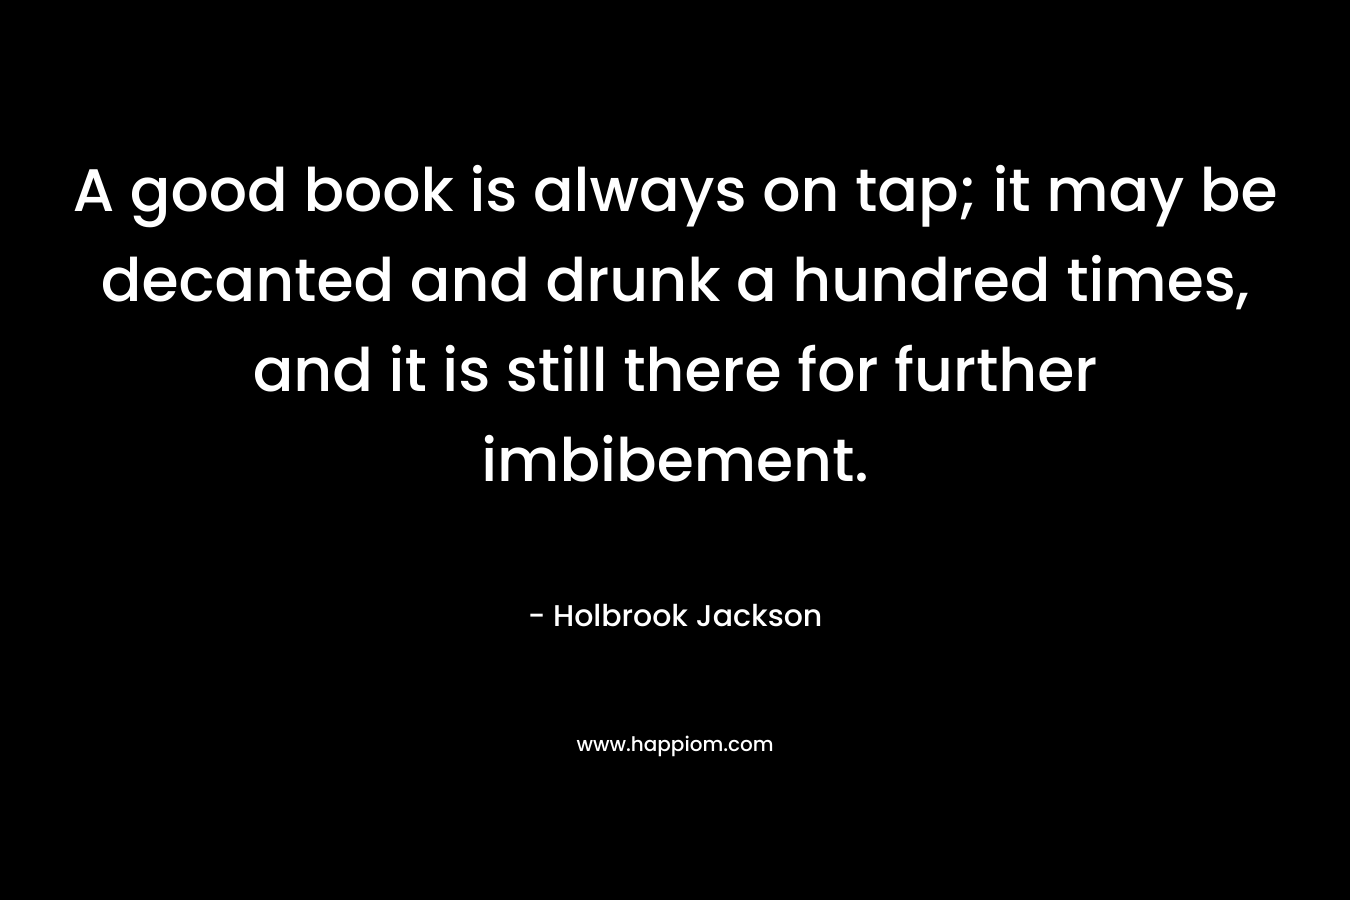 A good book is always on tap; it may be decanted and drunk a hundred times, and it is still there for further imbibement.  – Holbrook Jackson